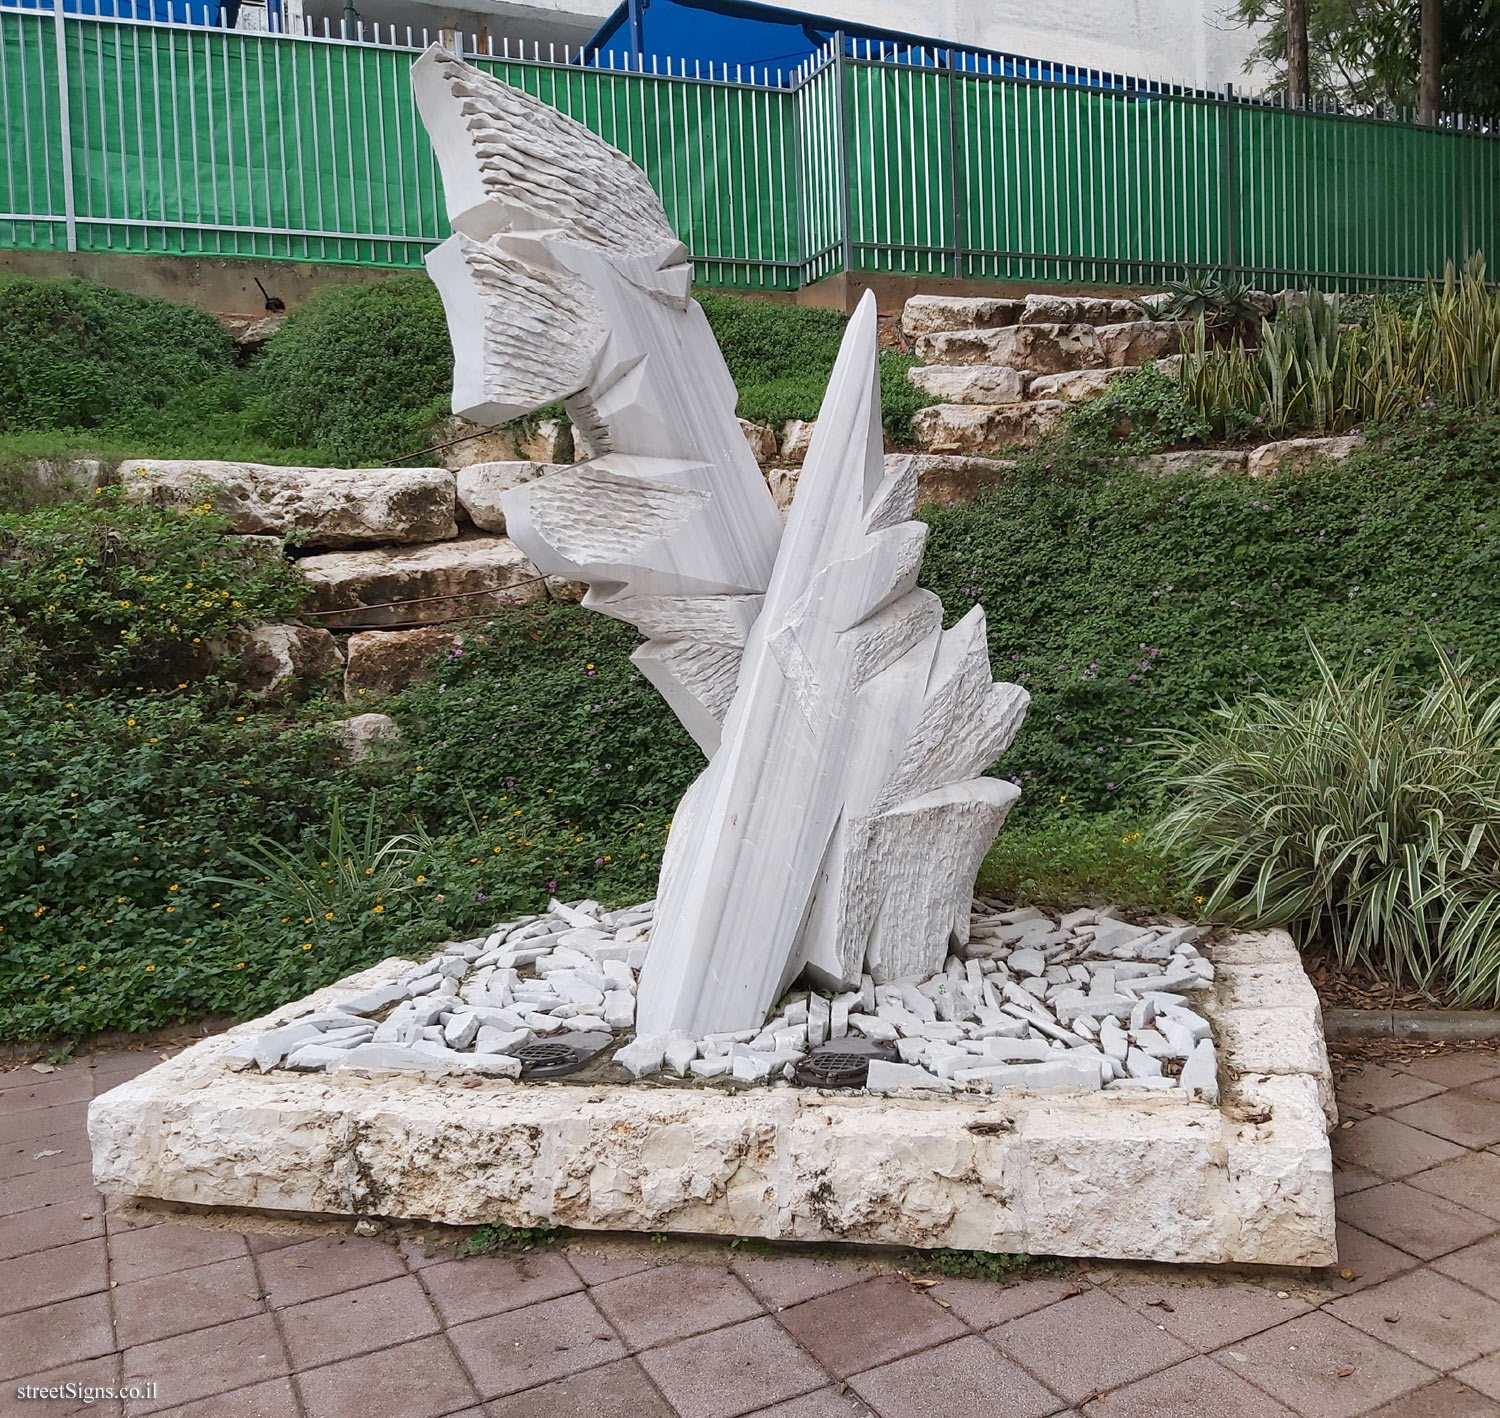 Rehovot - Garden of Heroism - a monument in memory of the Jews who fought the Nazis - A.D. Gordon St 55, Rehovot, Israel